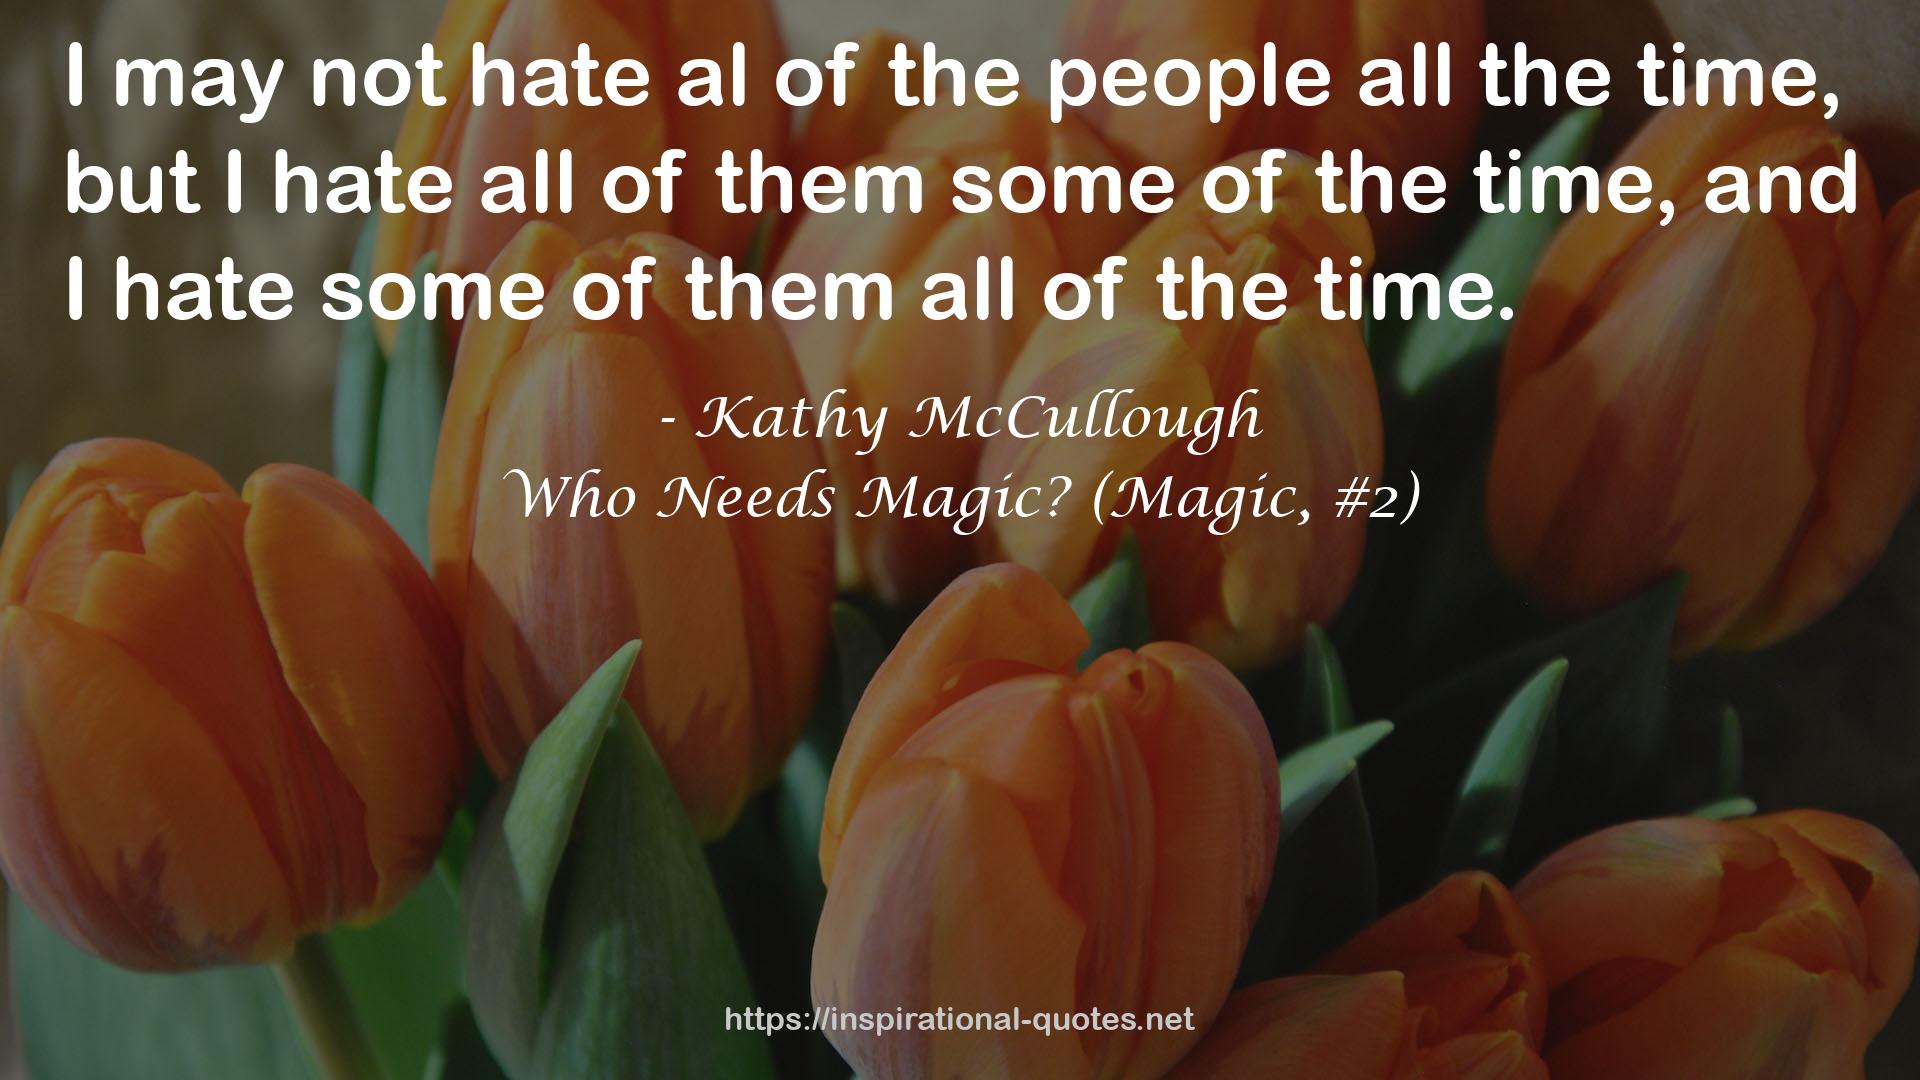 Kathy McCullough QUOTES